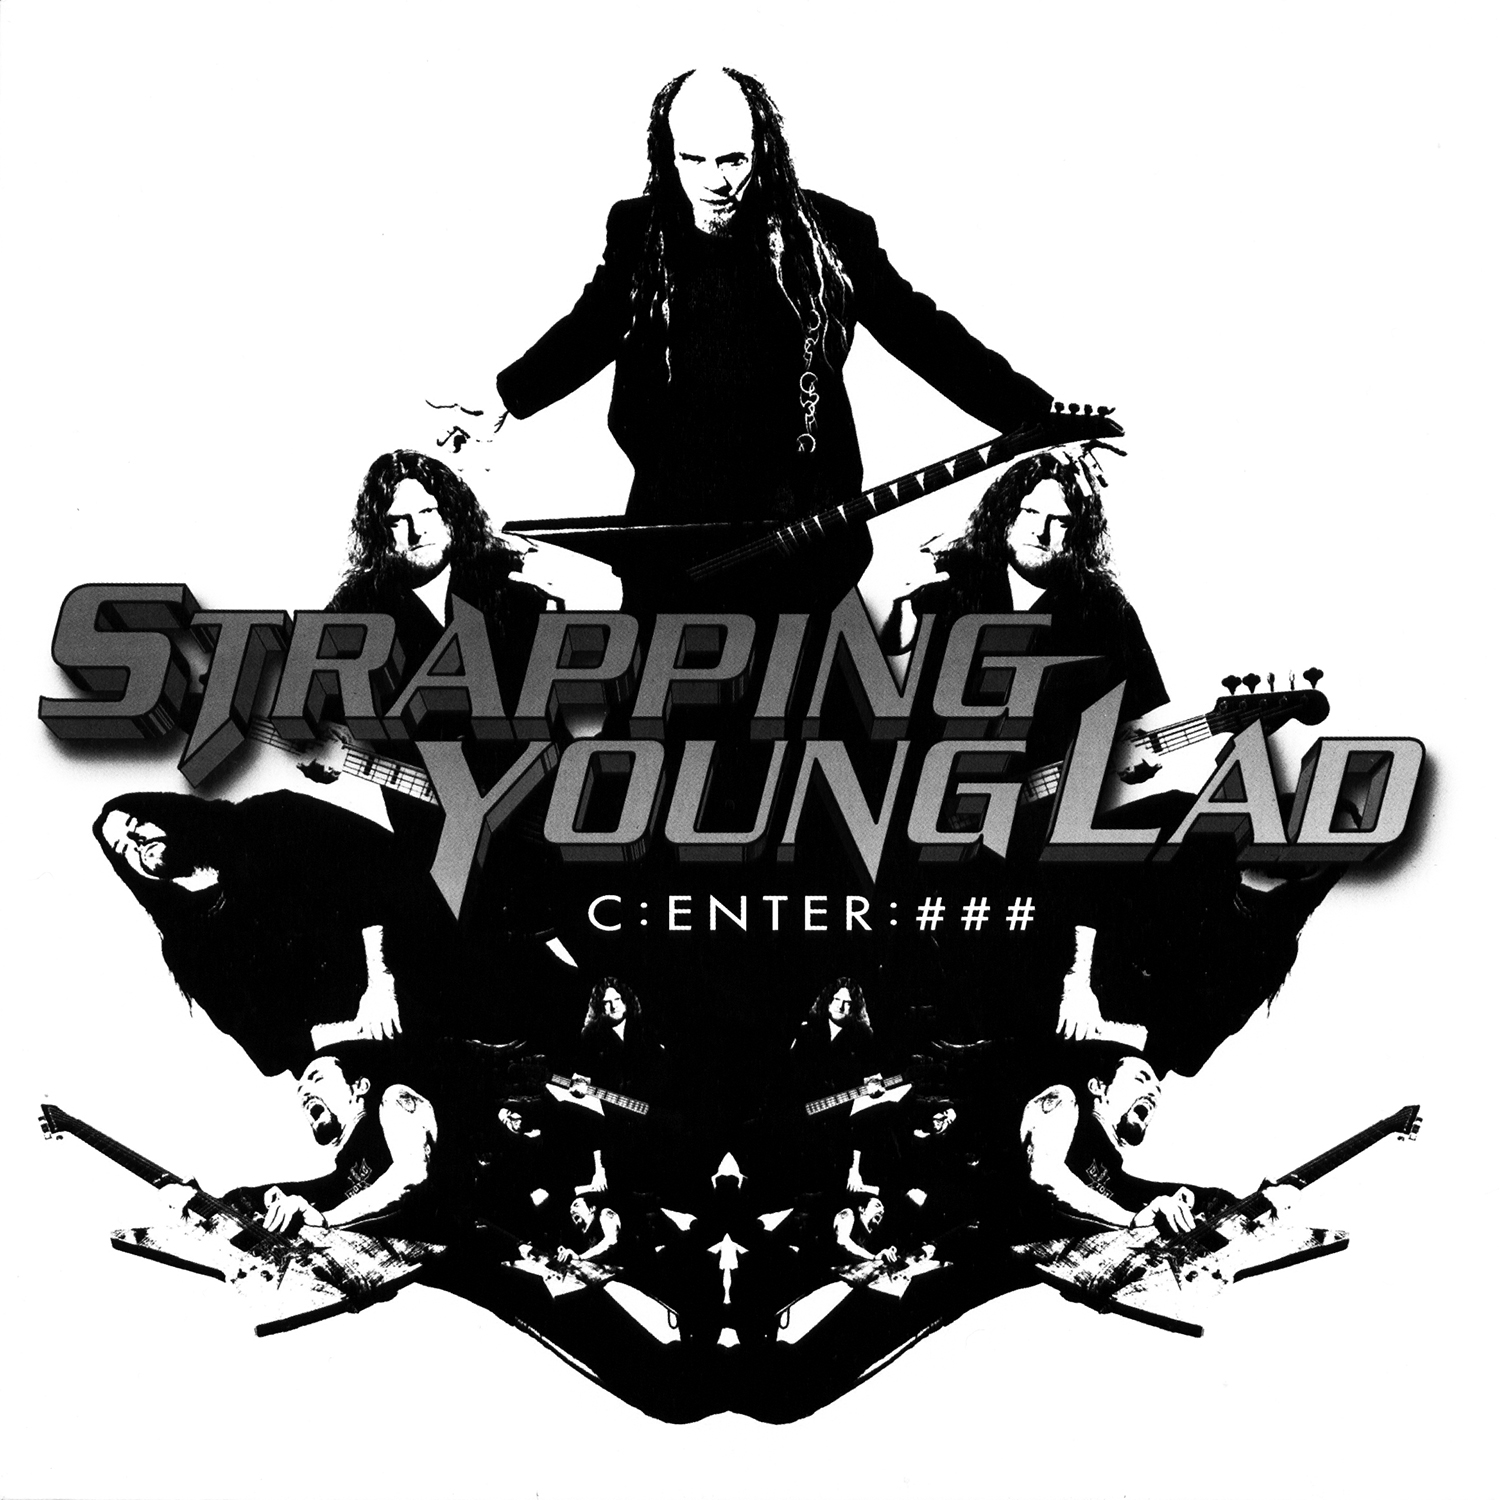 Strapping young. Девин Таунсенд Strapping young lad. Strapping young lad album. Strapping young lad Strapping young lad 2003. Strapping young lad the New Black.